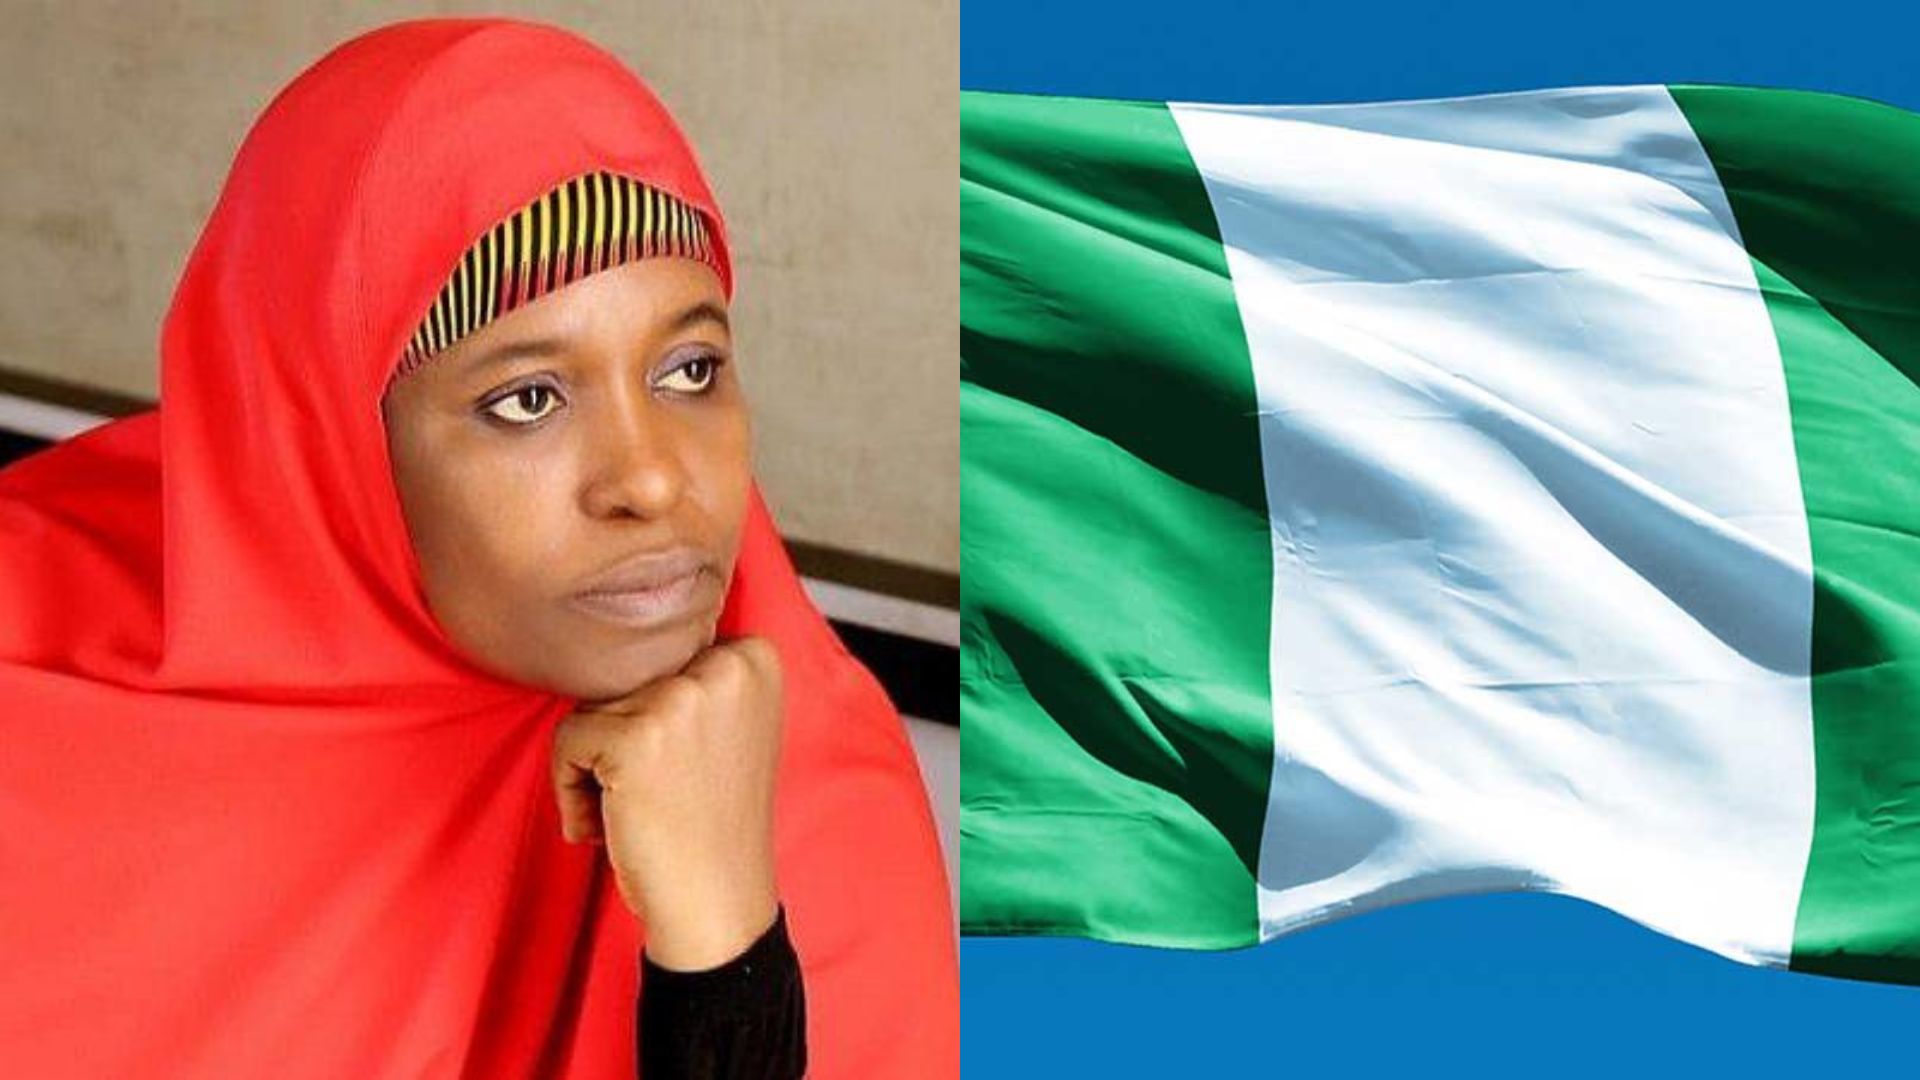 Nigerians fume as Aisha Yesufu refuses to stand up for new national anthem